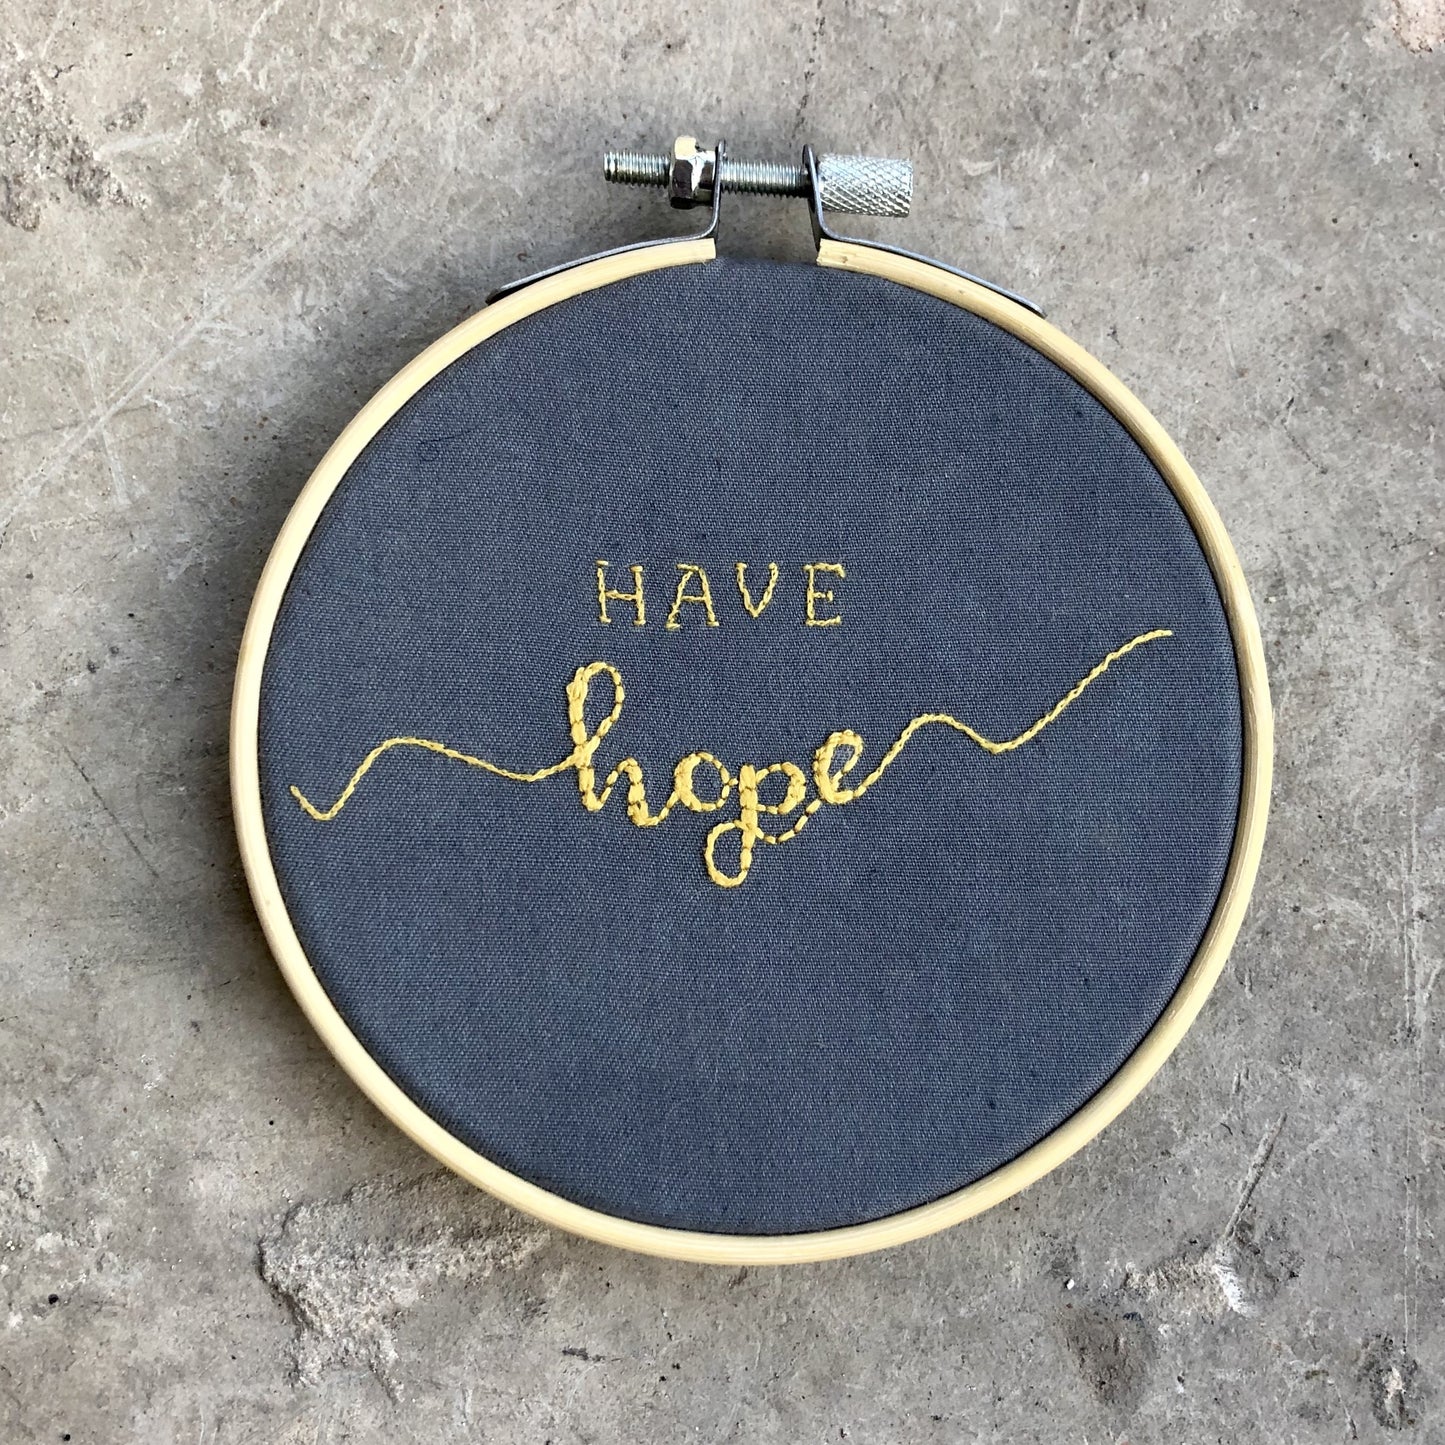 Have Hope Embroidery Hoop Wall Hanging